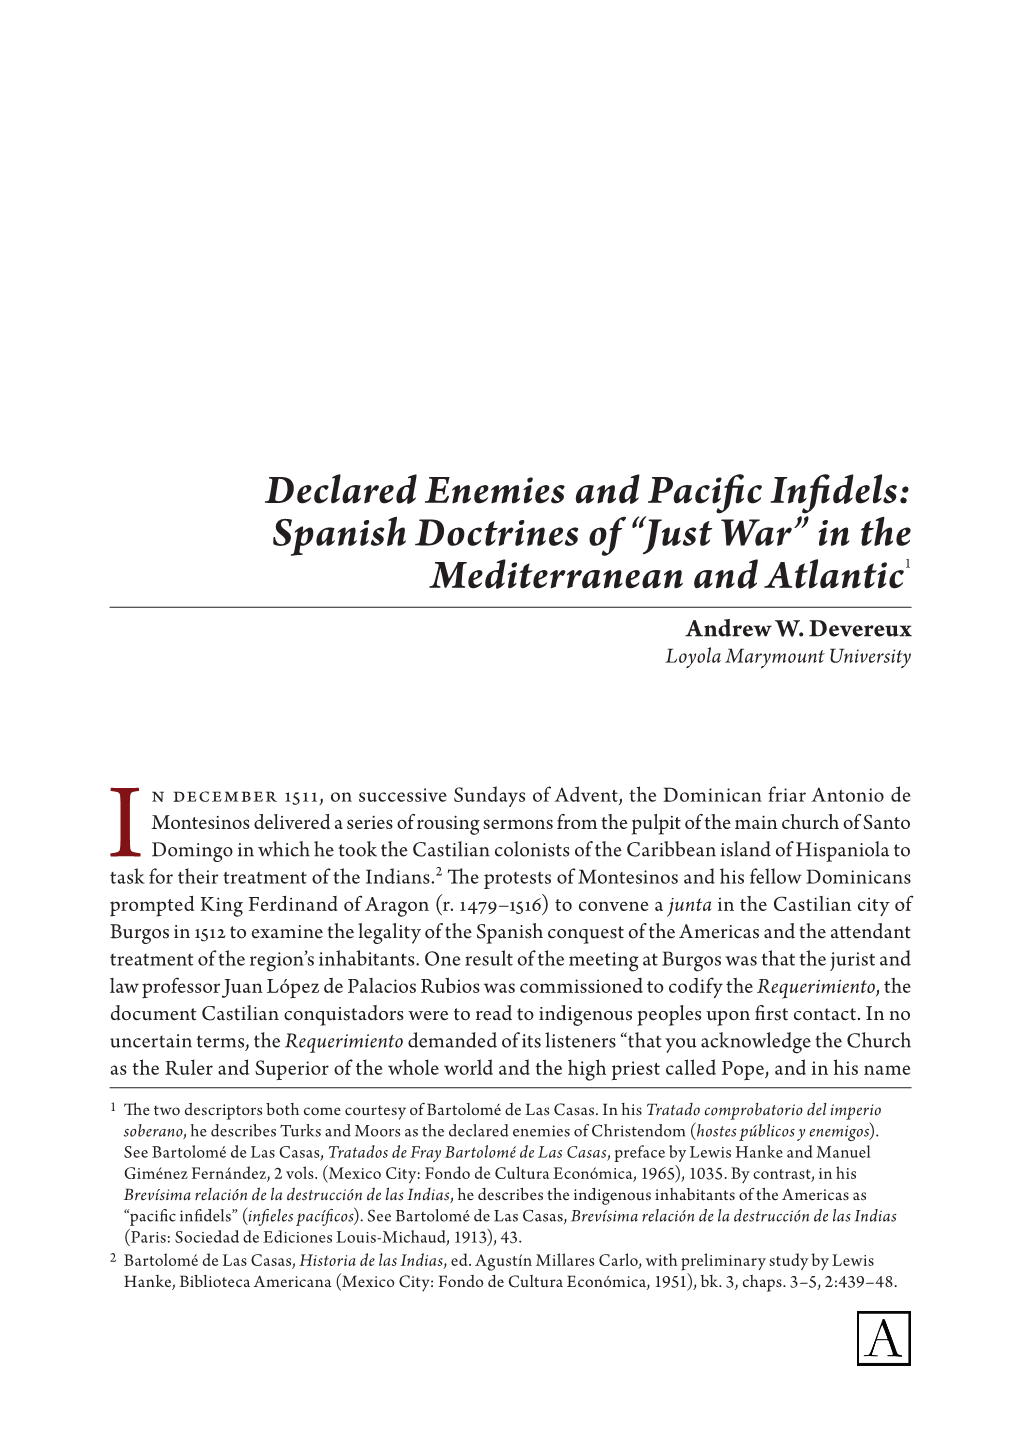 Declared Enemies and Pacific Infidels: Spanish Doctrines of “Just War” in the Mediterranean and Atlantic1 Andrew W